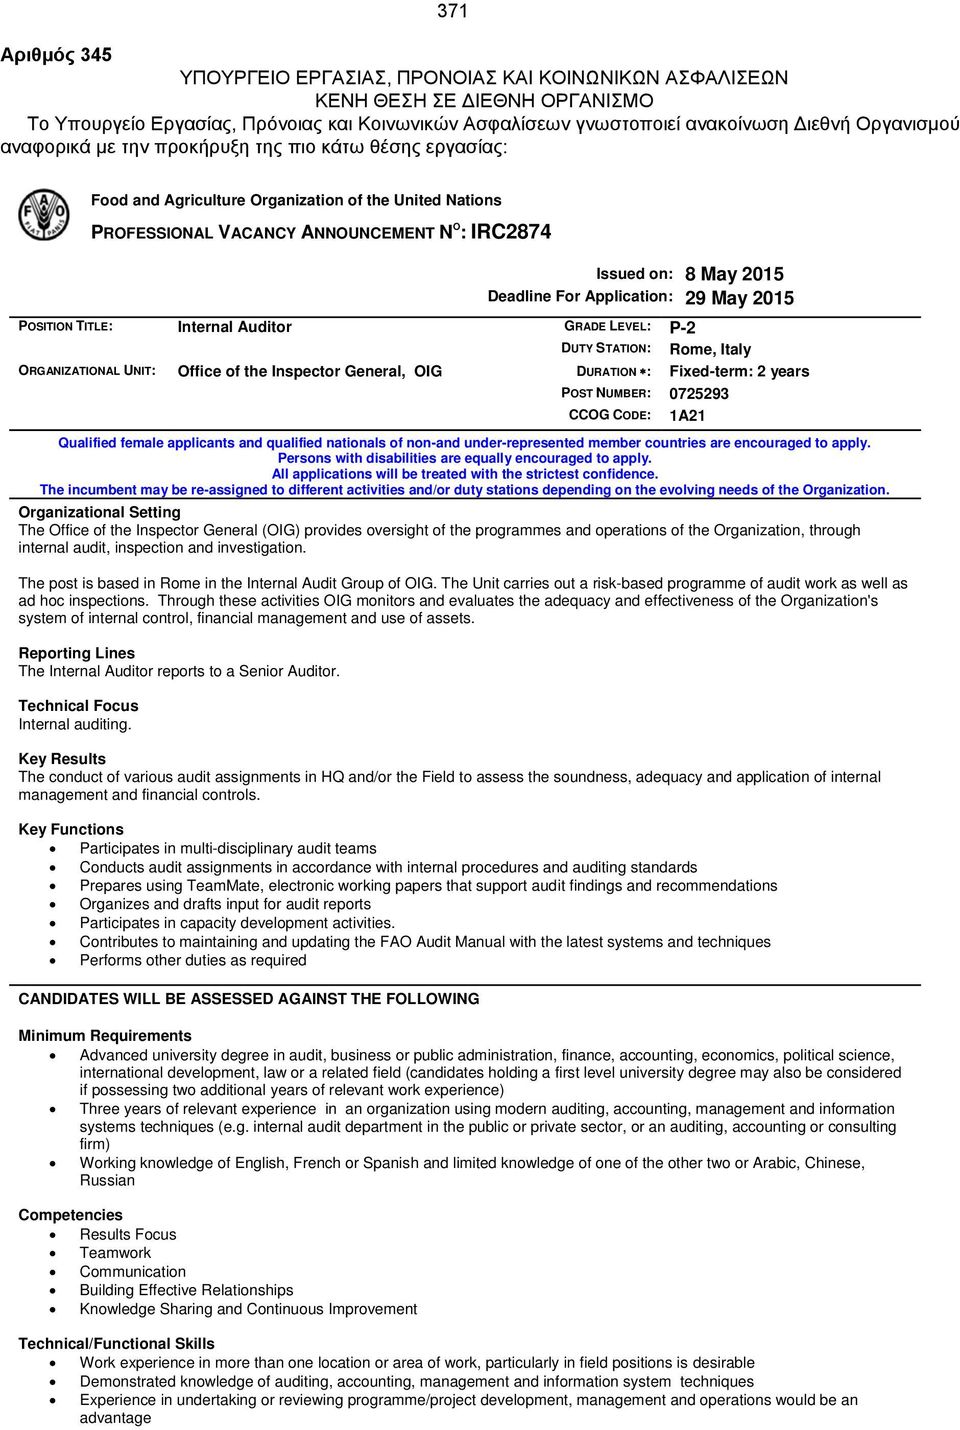 Application: 29 May 2015 POSITION TITLE: Internal Auditor GRADE LEVEL: P-2 DUTY STATION: Rome, Italy ORGANIZATIONAL UNIT: Office of the Inspector General, OIG DURATION : Fixed-term: 2 years POST